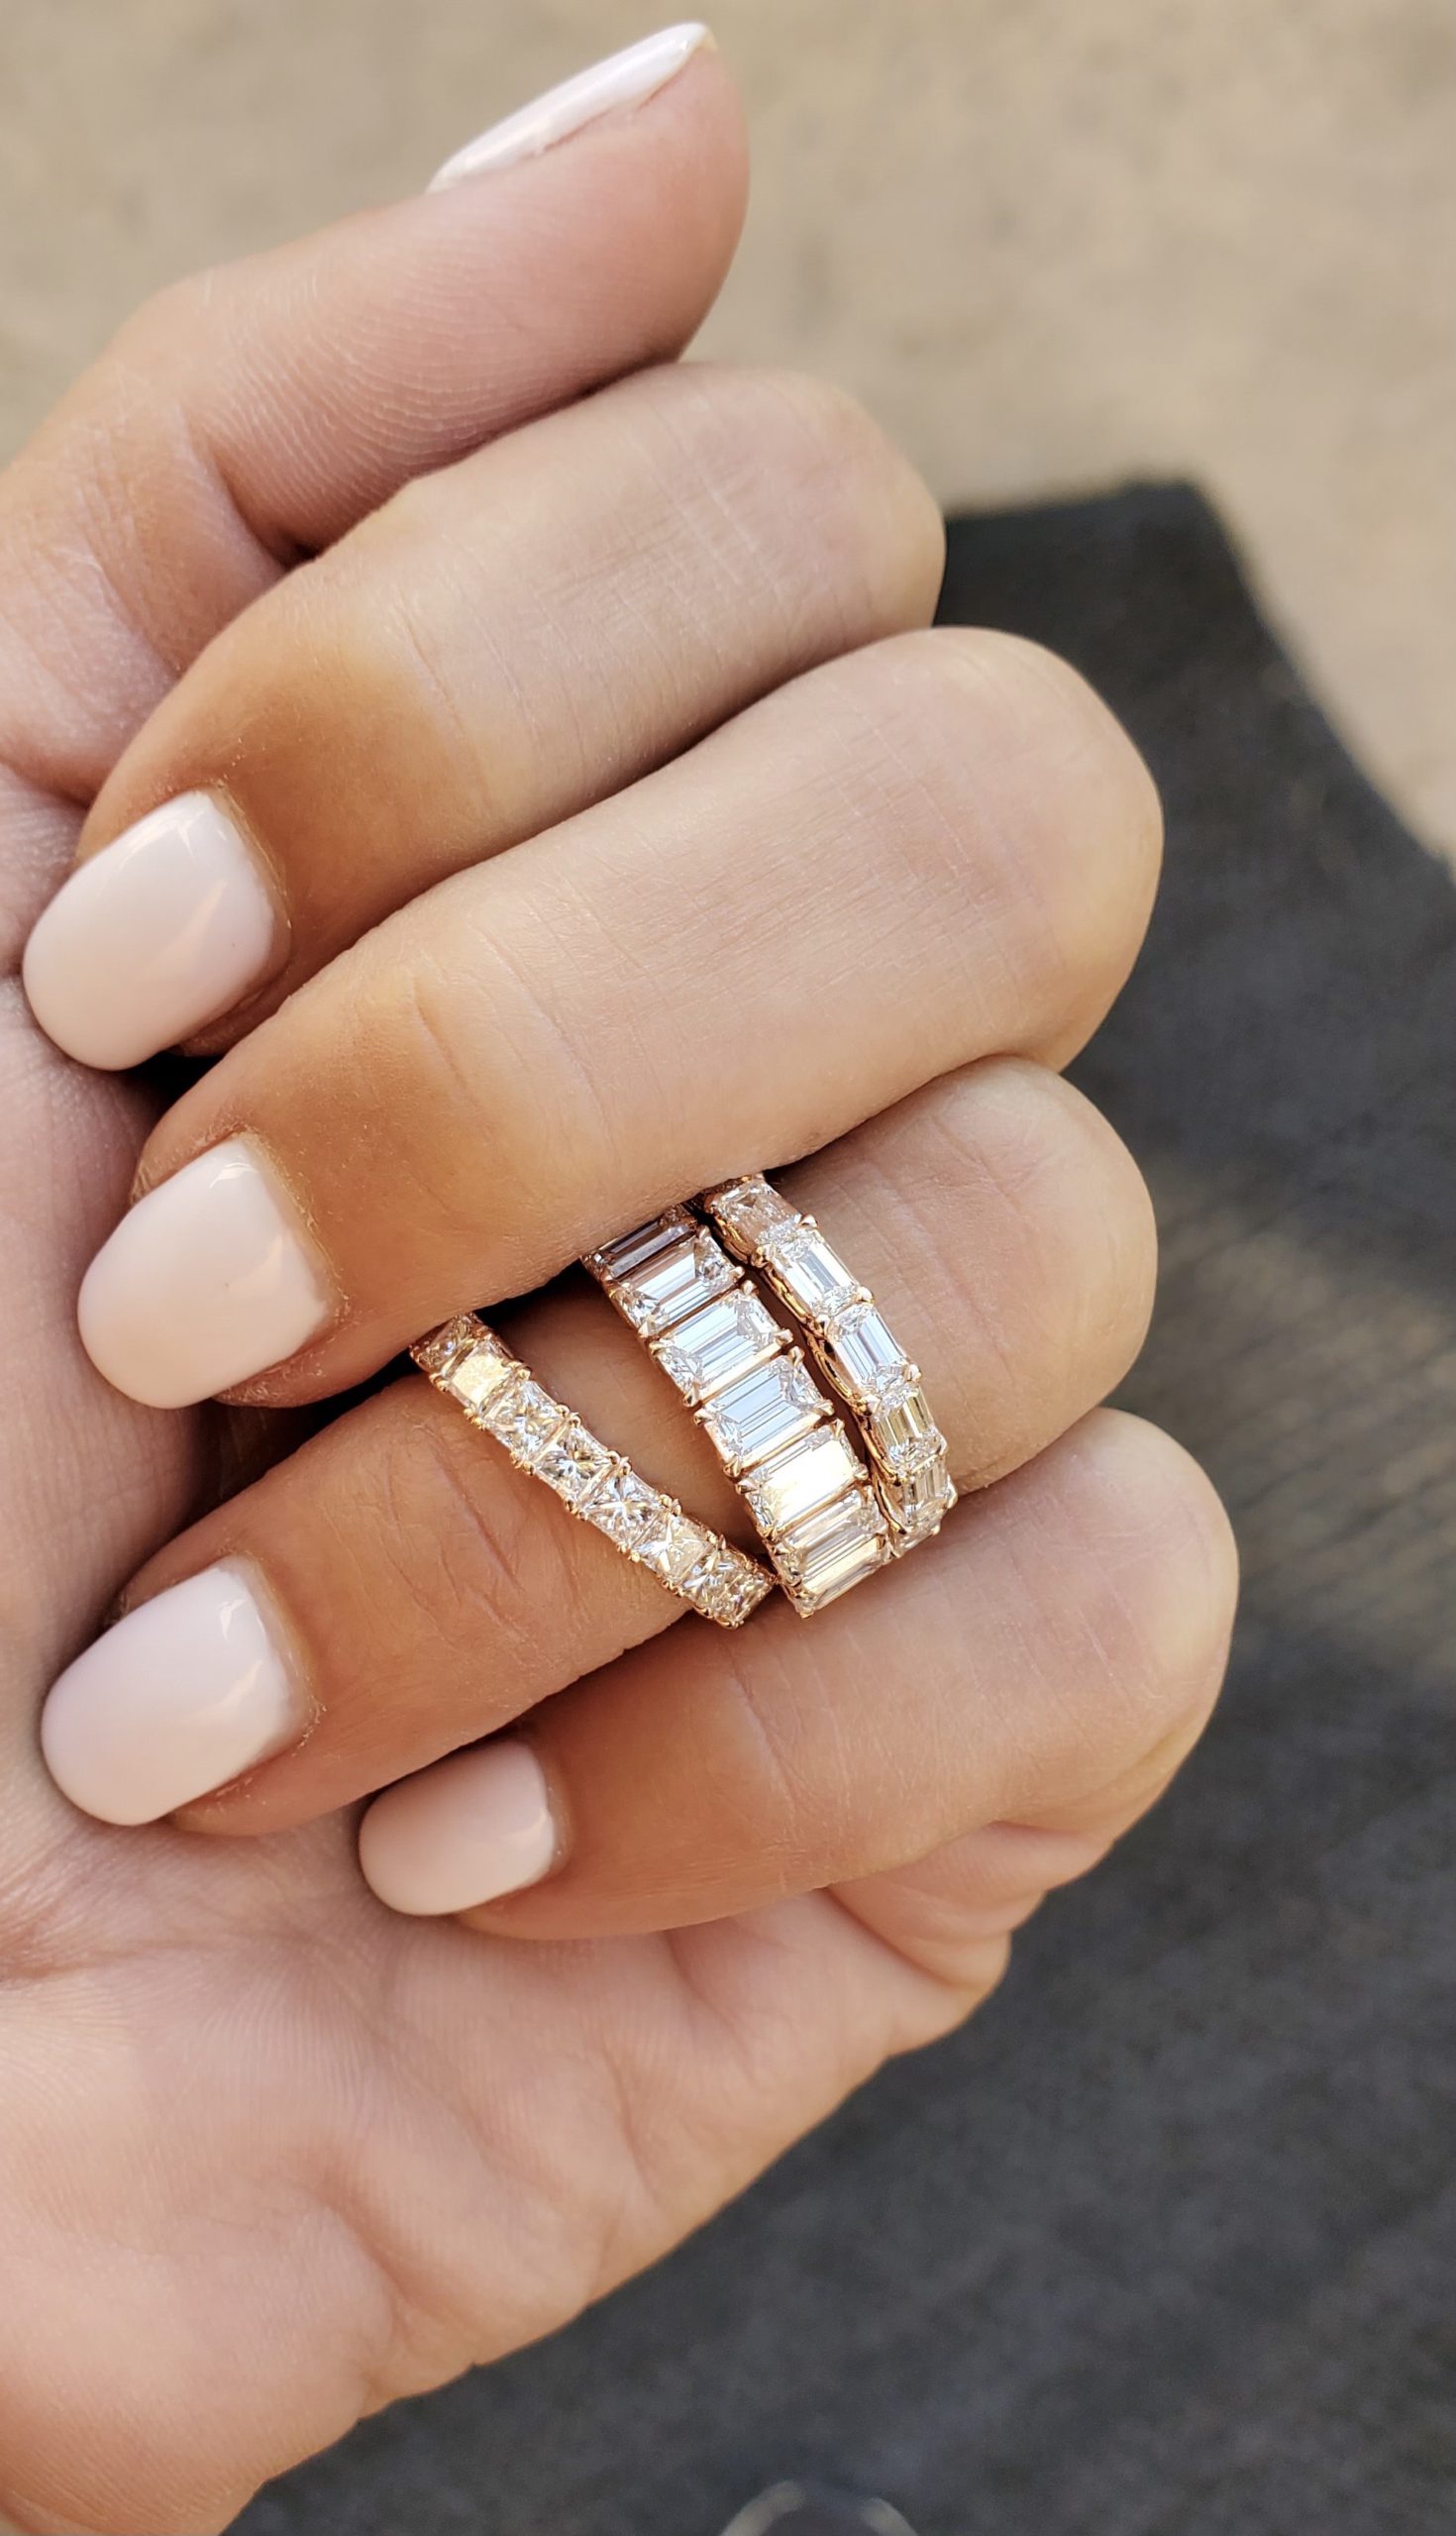 How to choose the perfect wedding ring